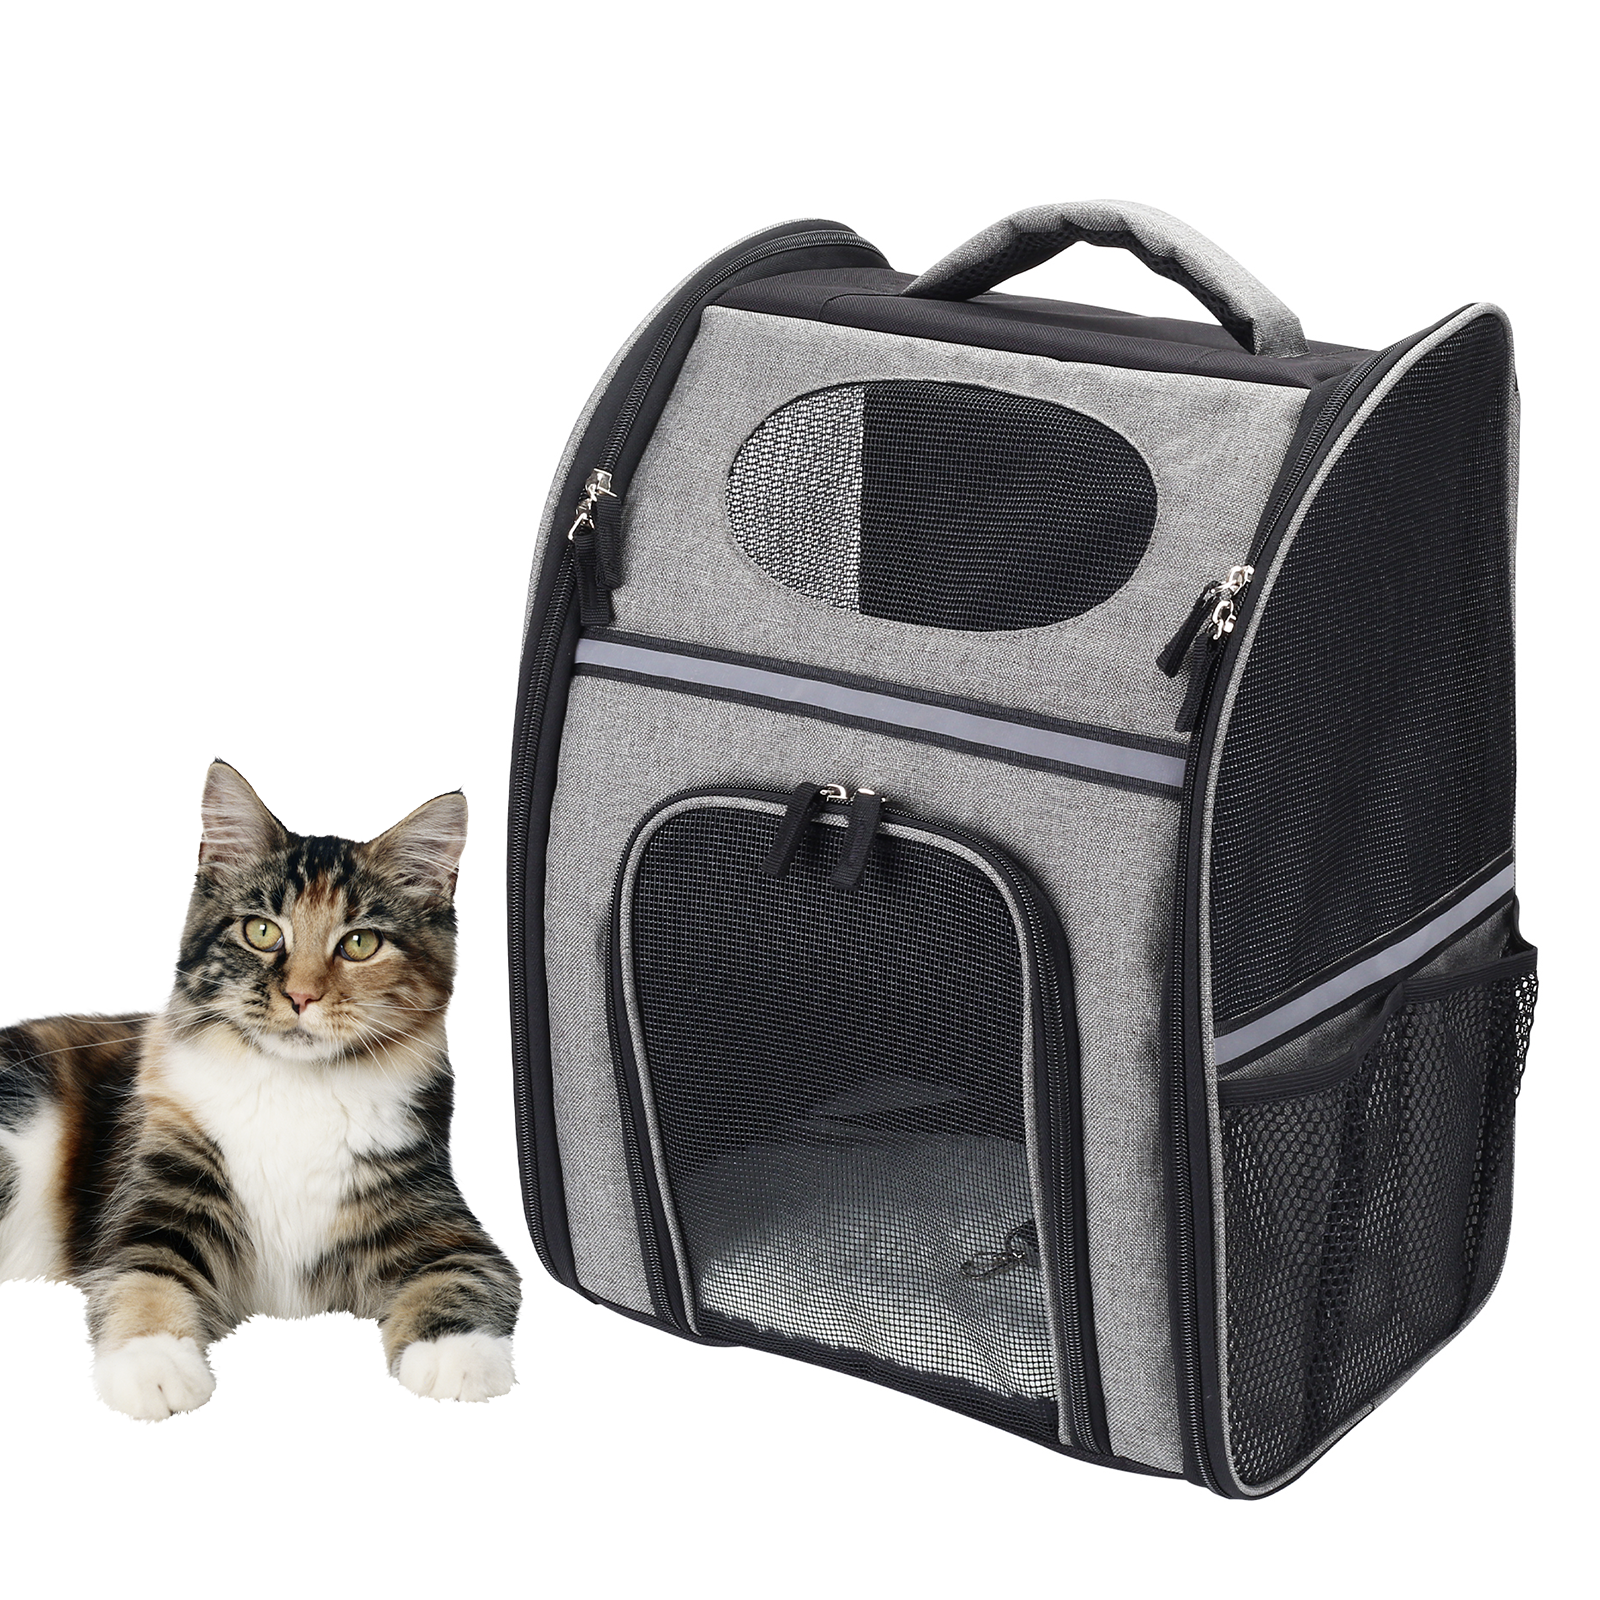 FluffyDream Pet Carrier Backpack for Large/Small Cats and Dogs, Puppies, Safety Features and Cushion Back Support for Travel, Hiking, Outdoor Use-  Black